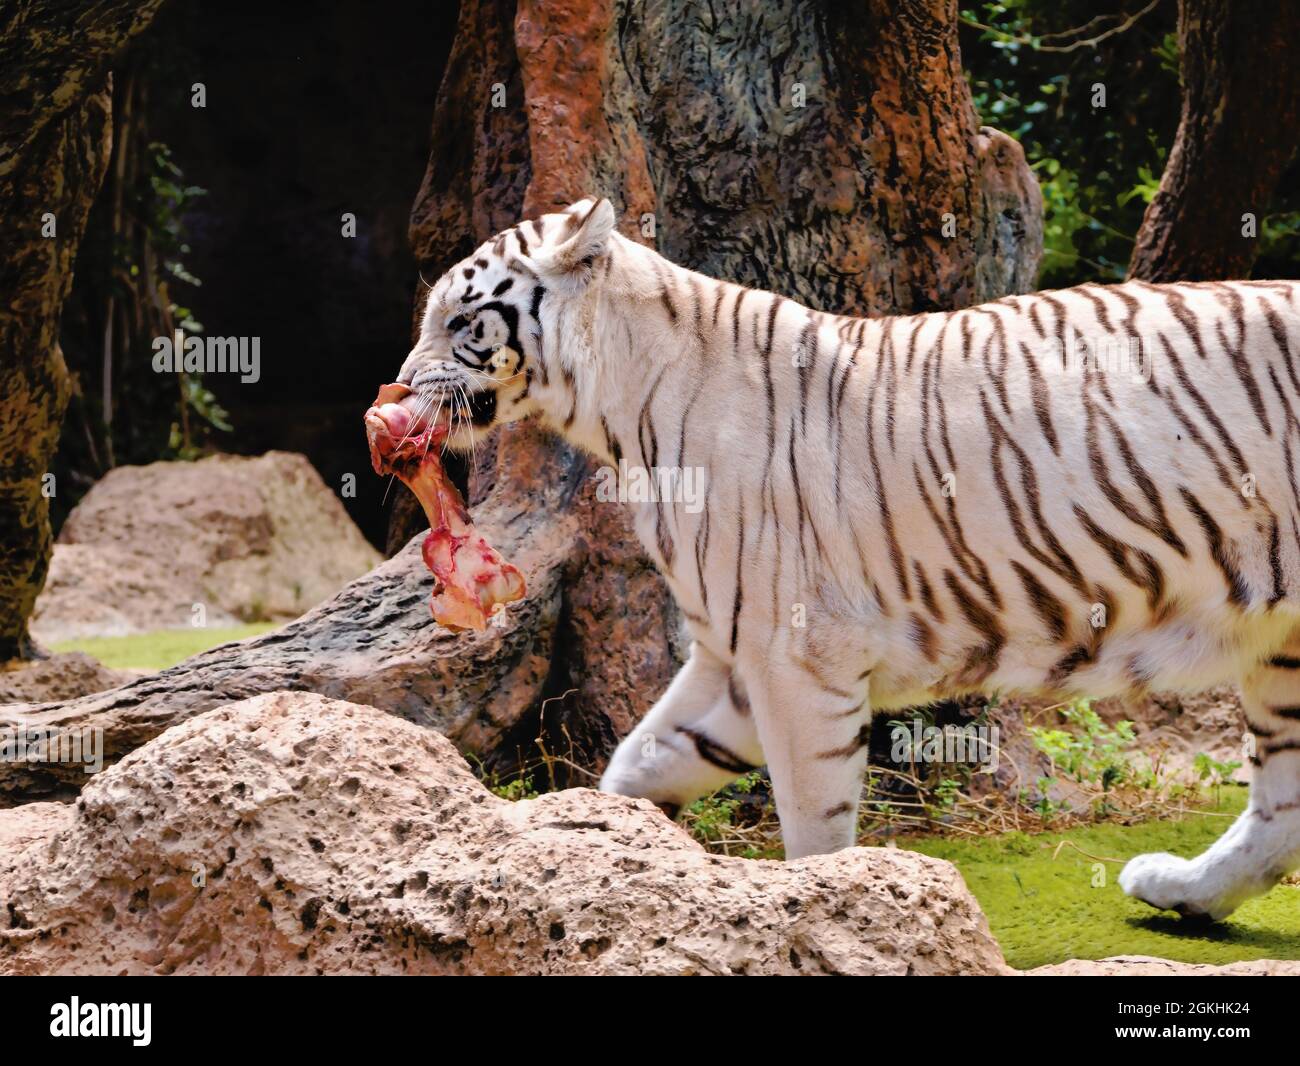 An elegant, beautiful white tiger with brown stripes lgoes to  his food place with a large bone in his mounth., close-up. Stock Photo